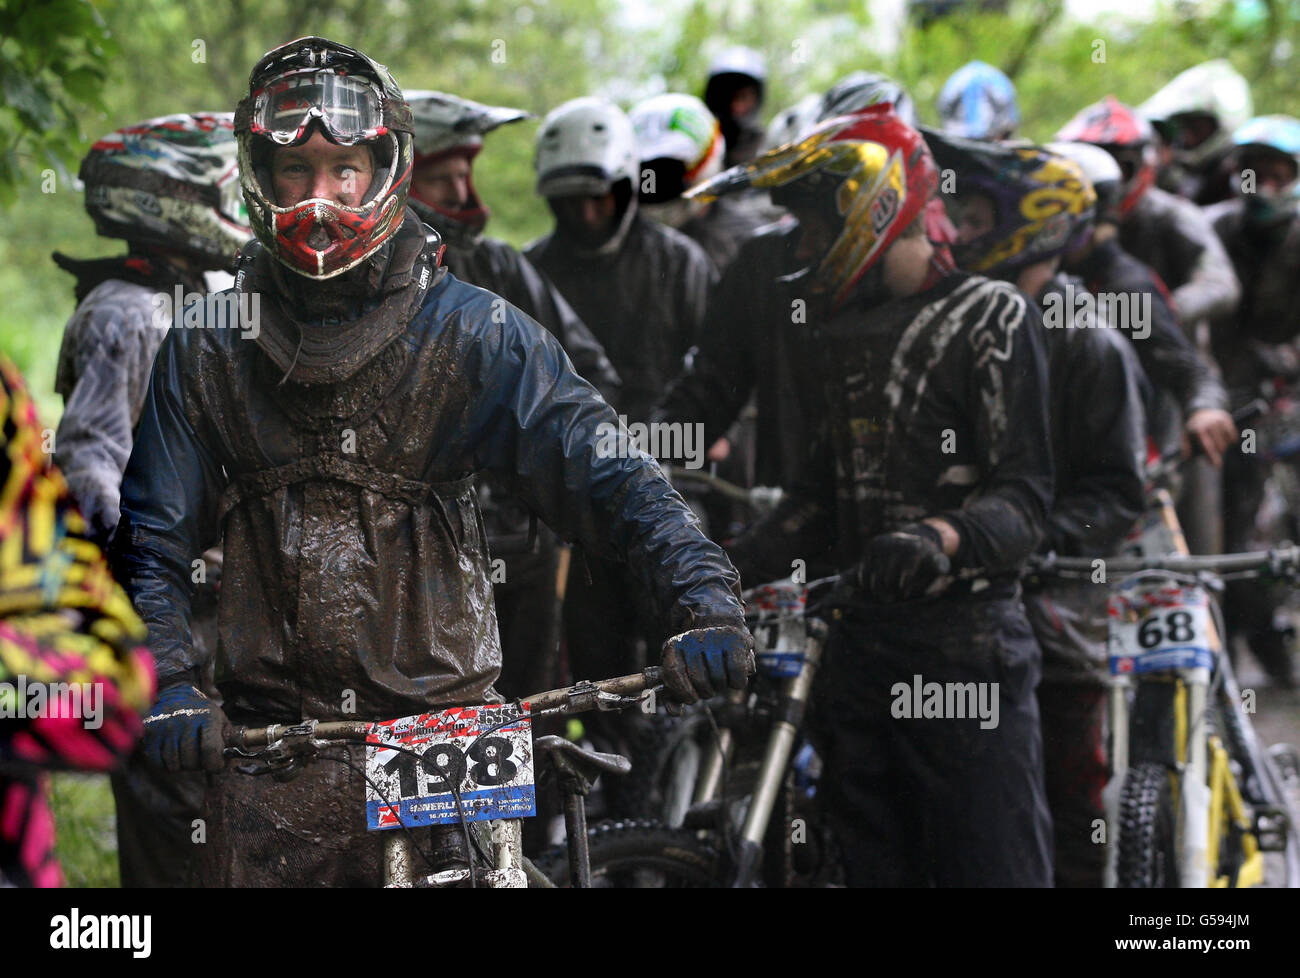 Competing Mountain Bike racers try out the forest trails covered in deep mud at the iXS European Downhill Cup race in Innerleithen, Scotland, ahead of the start of the racing. Stock Photo